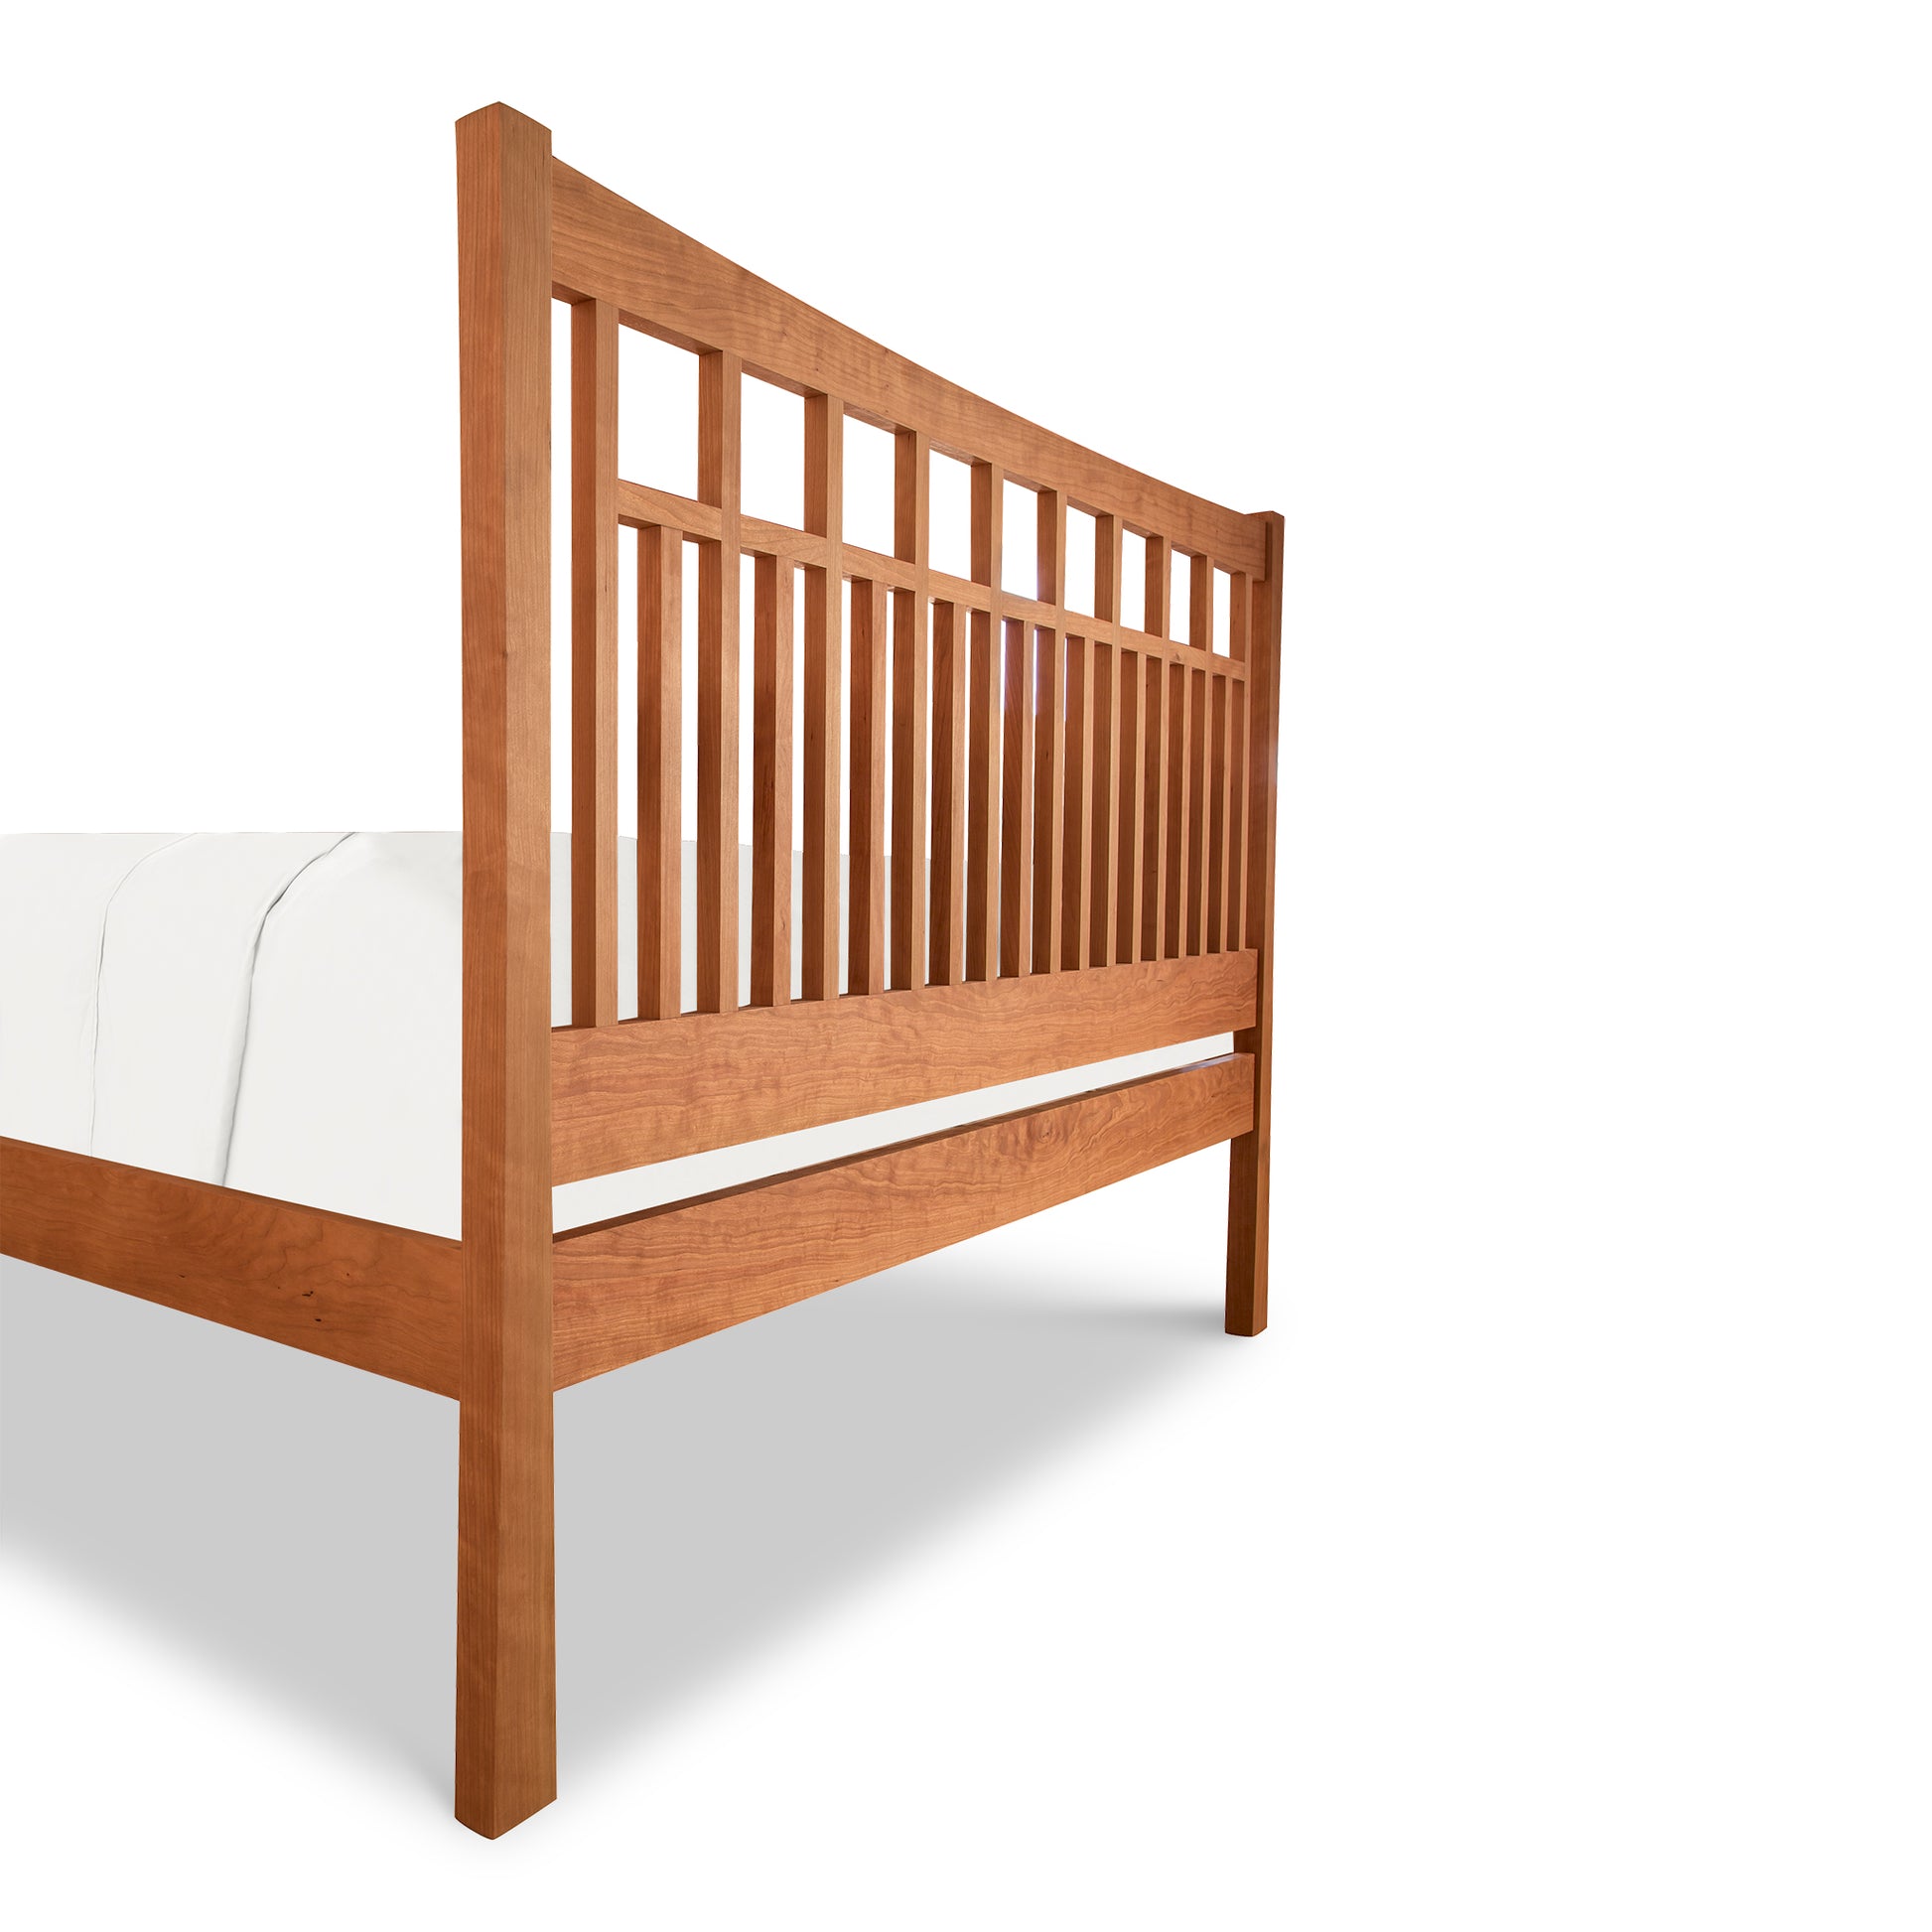 A Vermont Furniture Designs Contemporary Craftsman Low Footboard Bed with slats, featuring one white mattress, isolated on a white background.